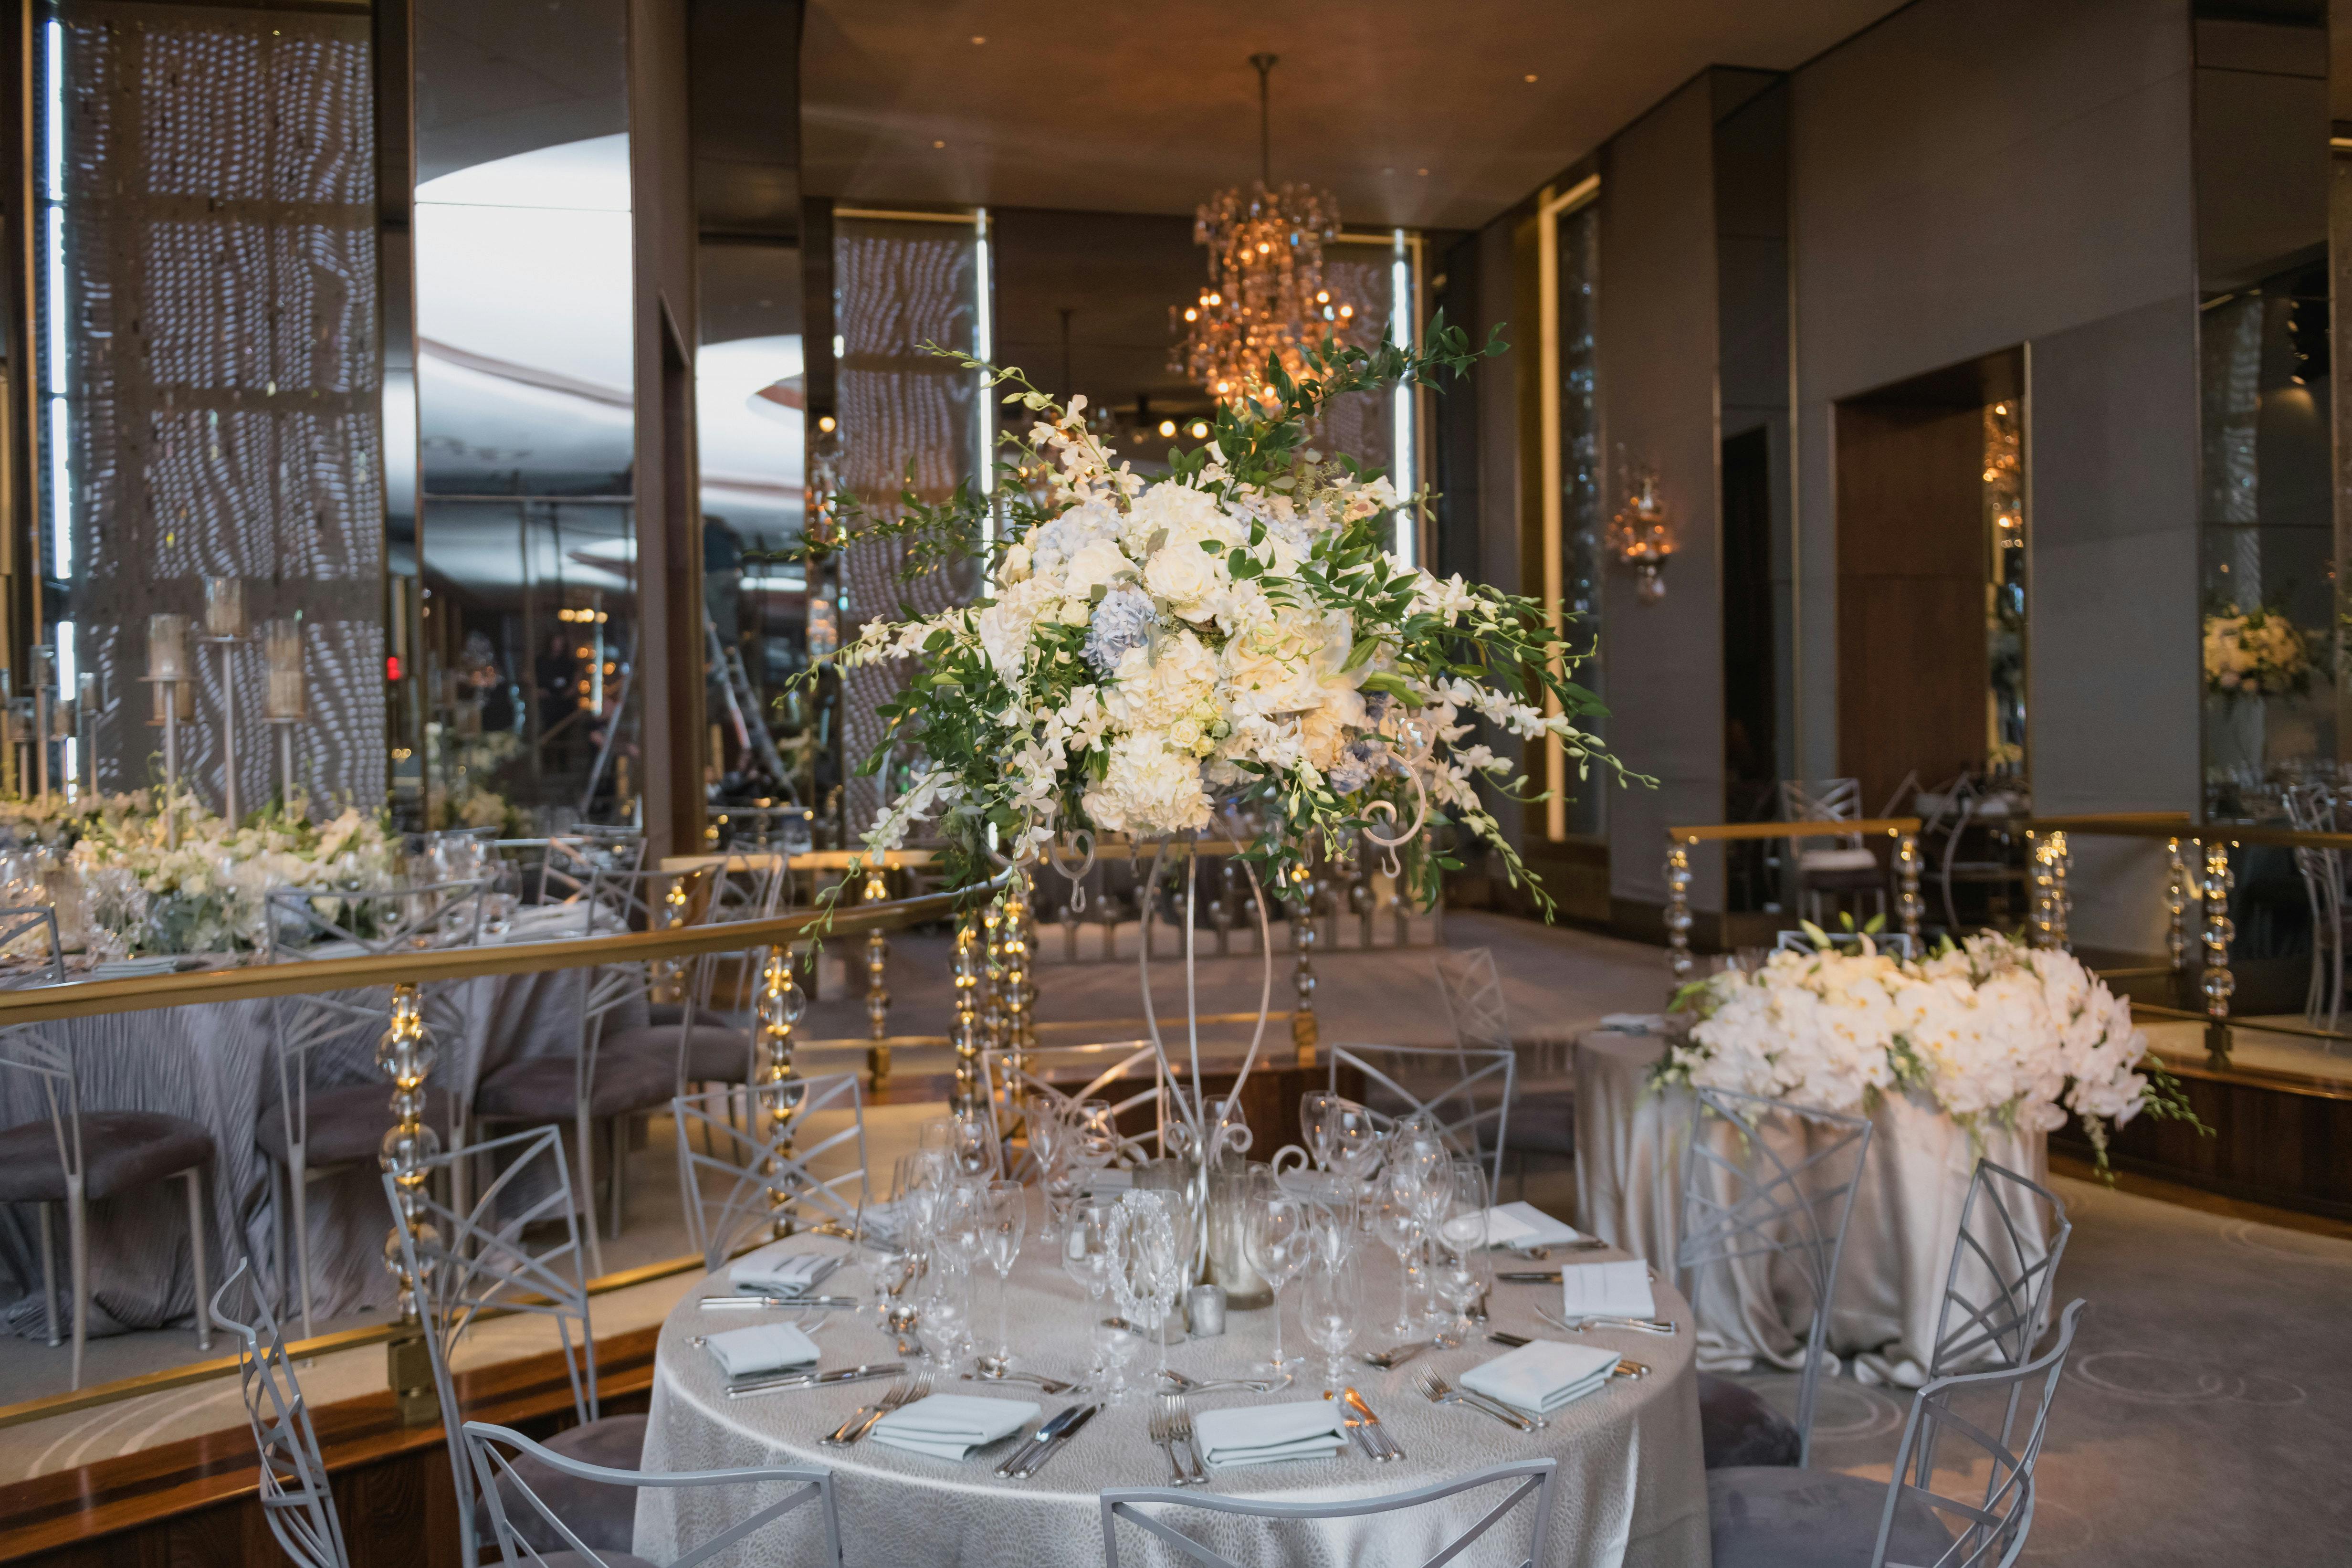 Wedding Reception Venue with a Round Banquet Table Featuring Silver Linen and a Free-Form Wedding Centerpiece of White Hydrangeas and Greens